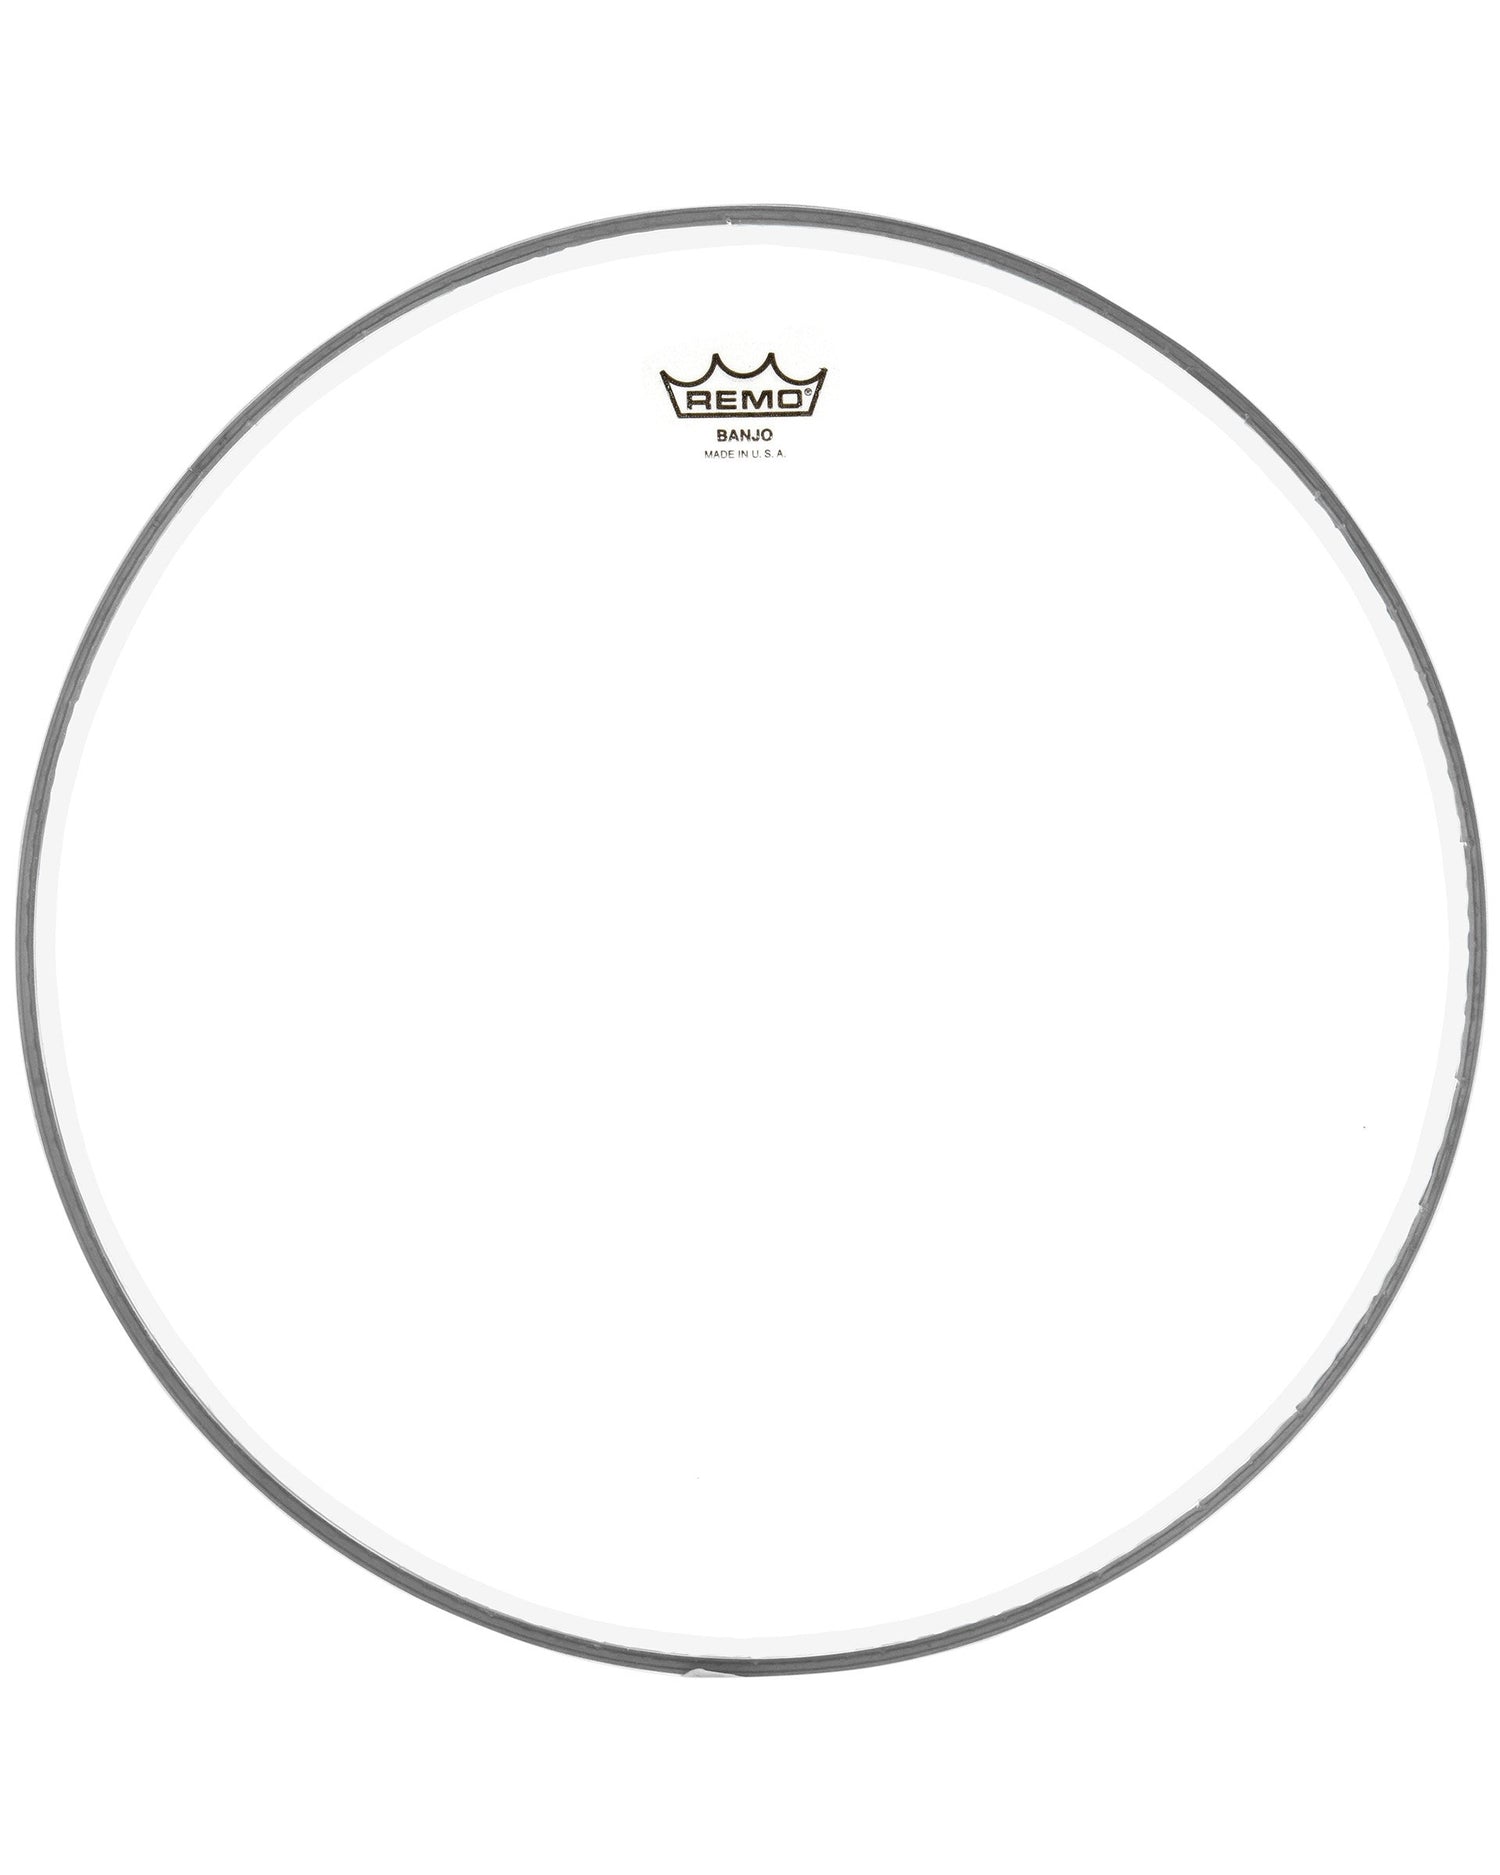 Image 1 of Remo Clear Banjo Head, 10 11/16 Inch Diameter, Medium Crown (7/16 Inch) - - SKU# B1011-M-CLR : Product Type Accessories & Parts : Elderly Instruments